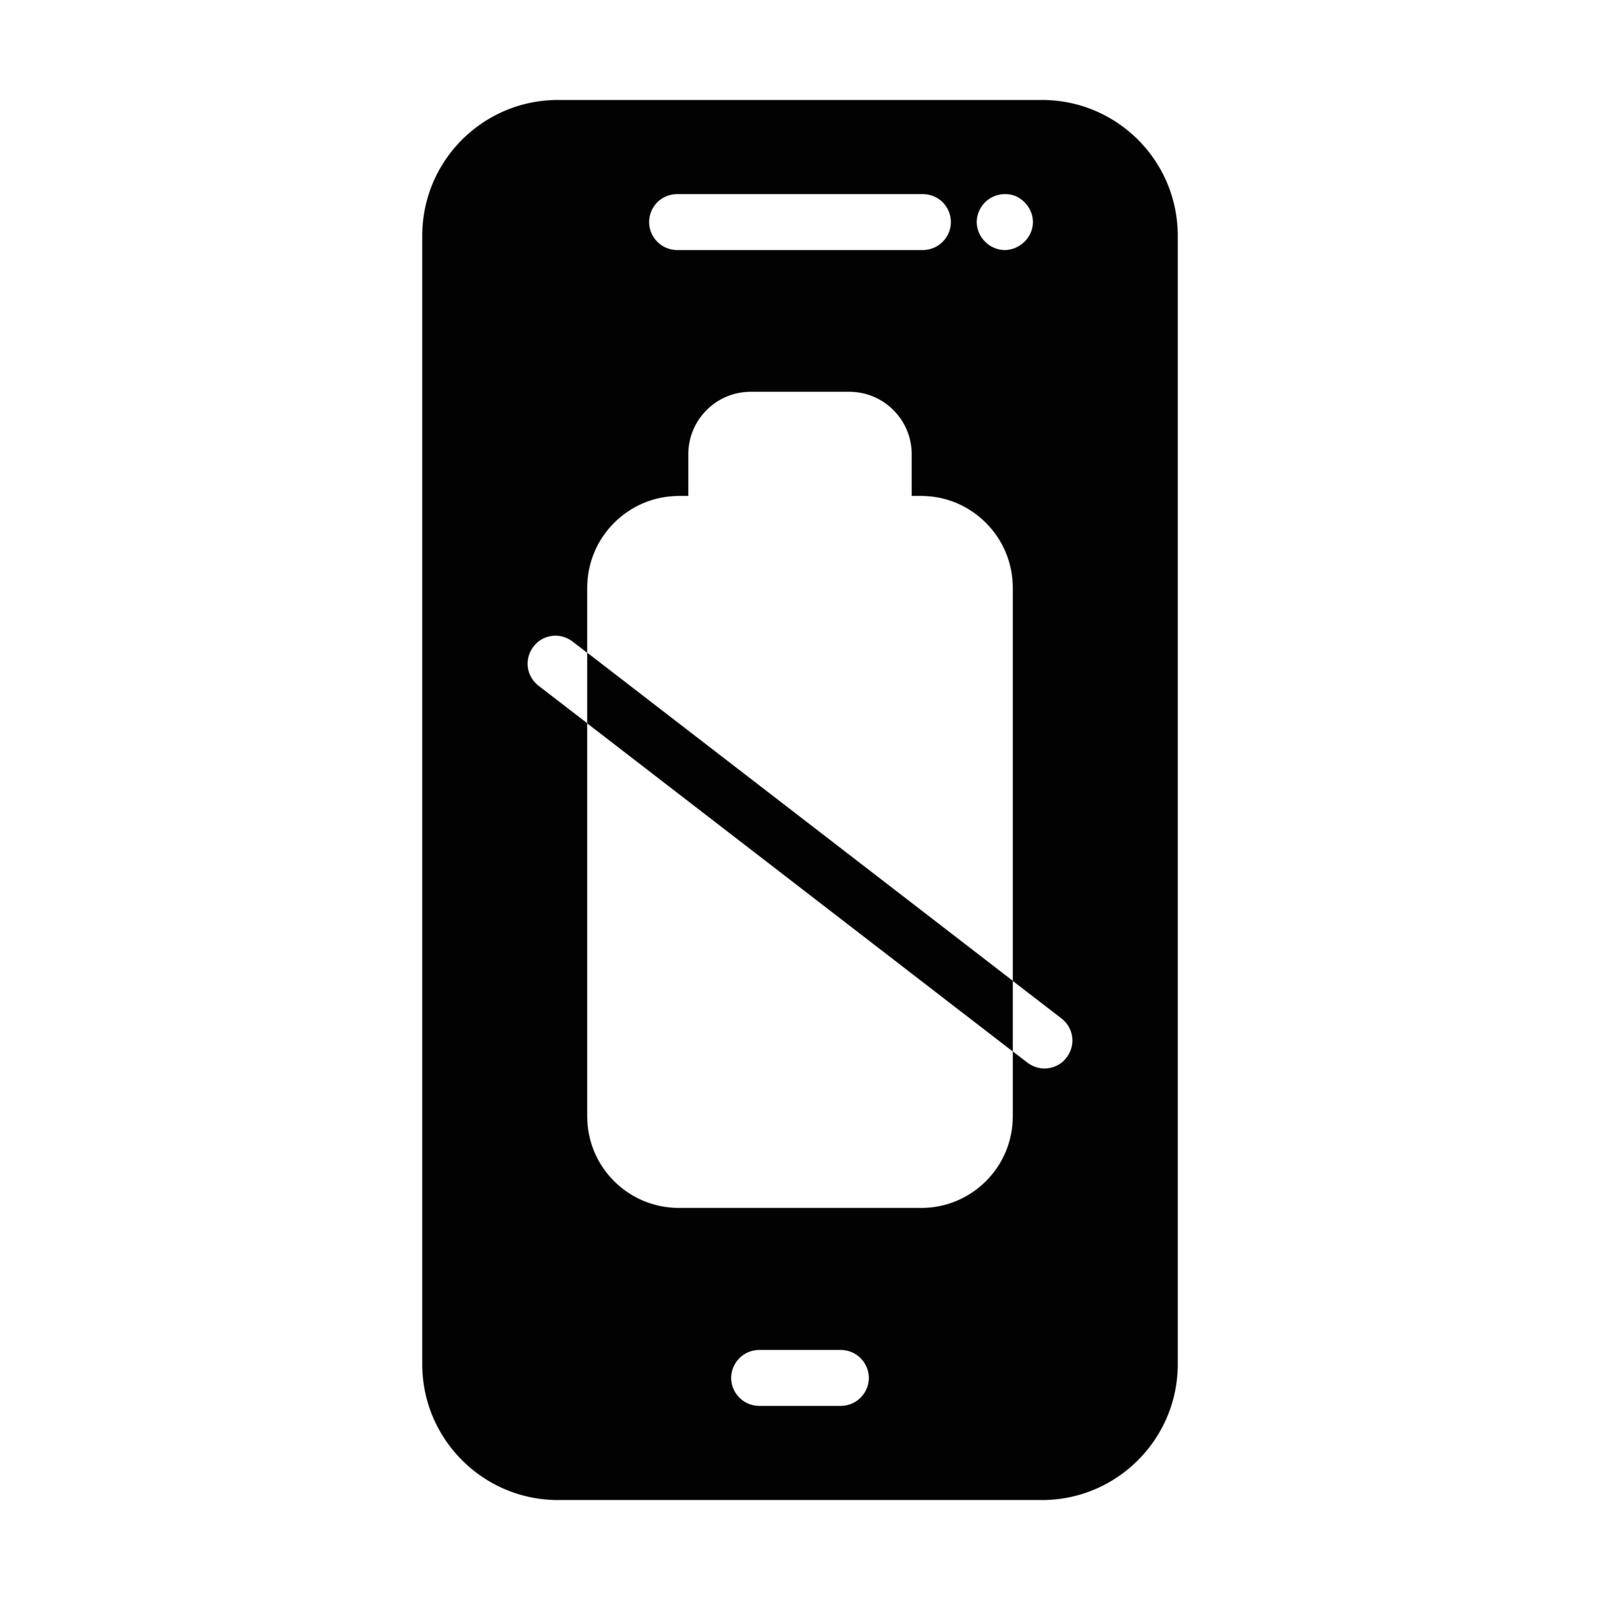 phone Vector illustration on a transparent background. Premium quality symbols. Gyliph vector icon for concept and graphic design.